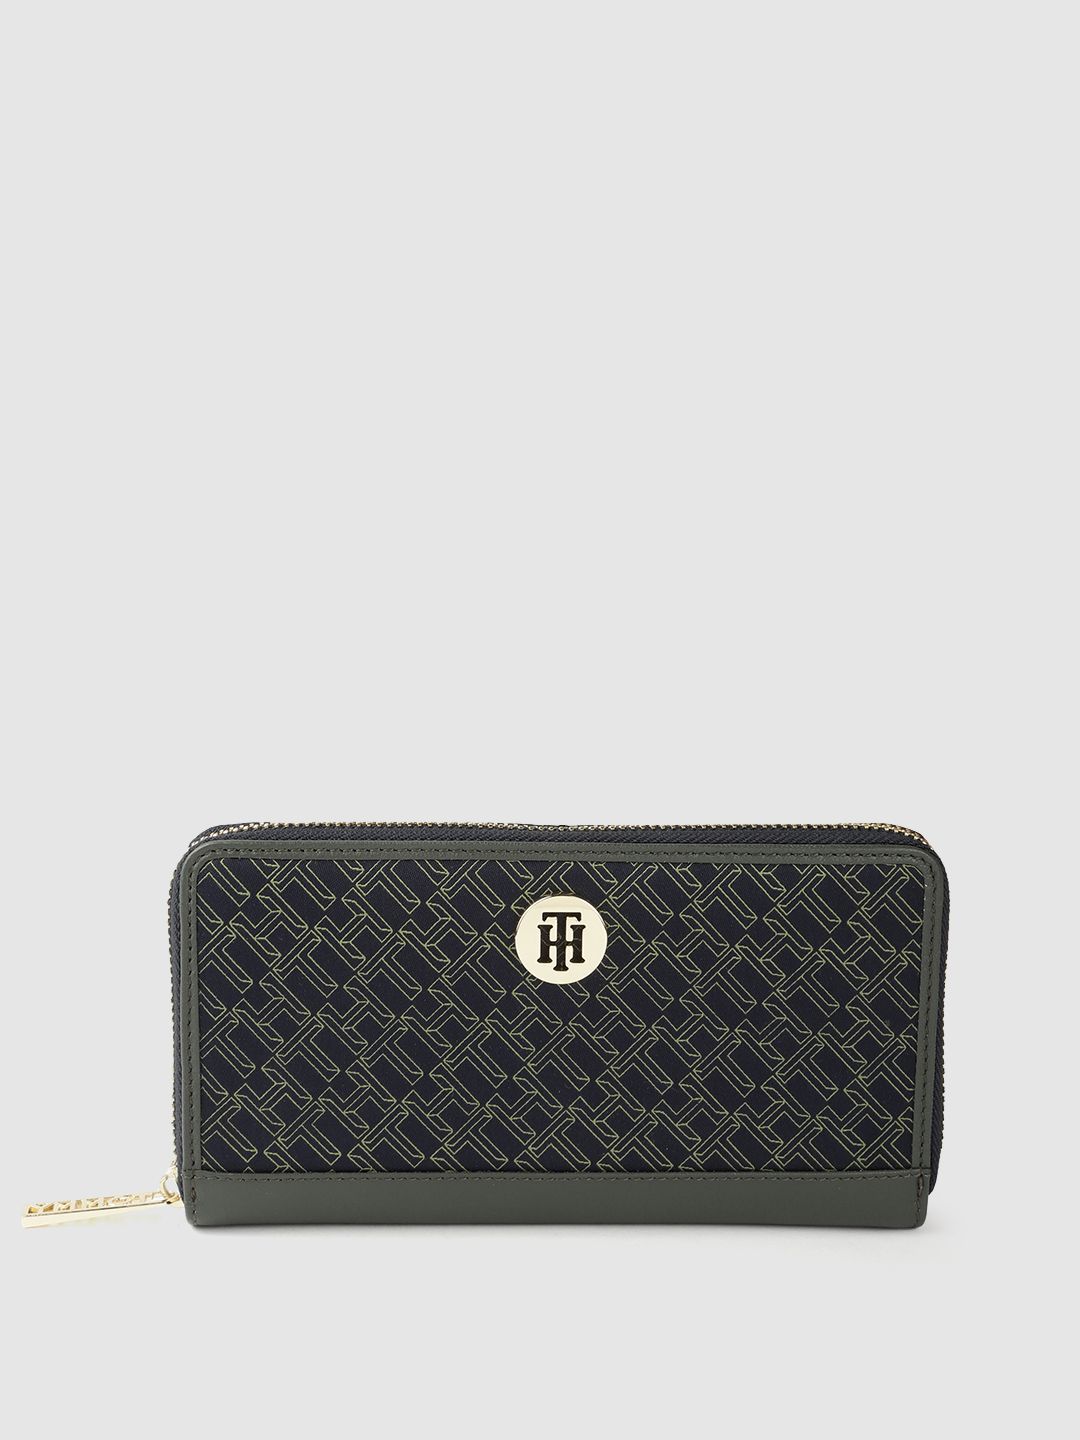 Tommy Hilfiger Women Olive Green & Navy Blue Embellished Two Fold Leather Wallet Price in India